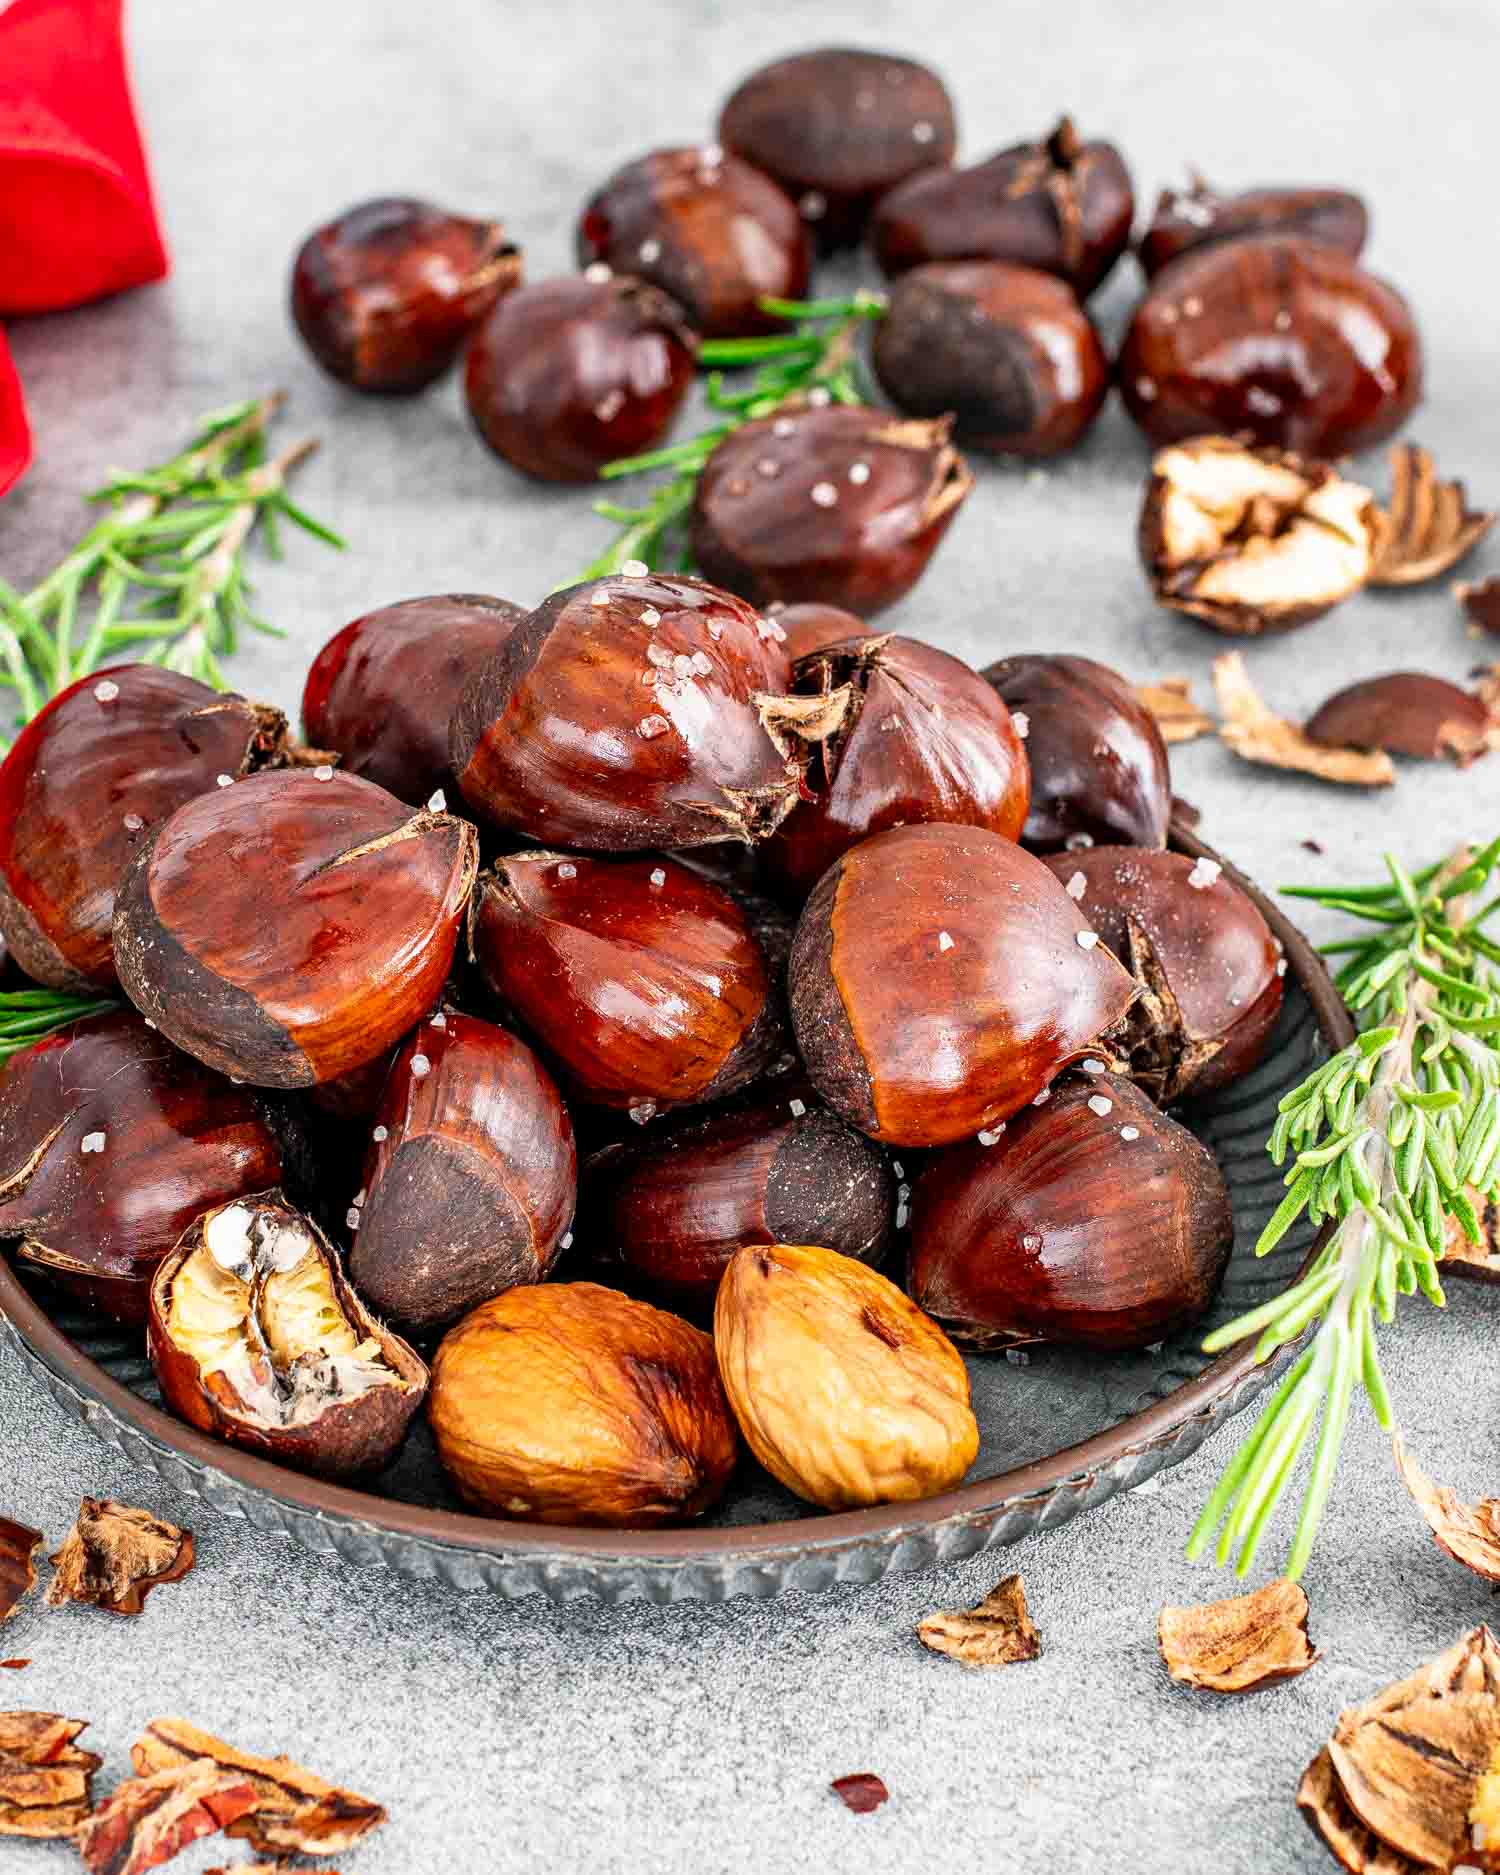 roasted chestnuts on a plate along some fresh rosemary.